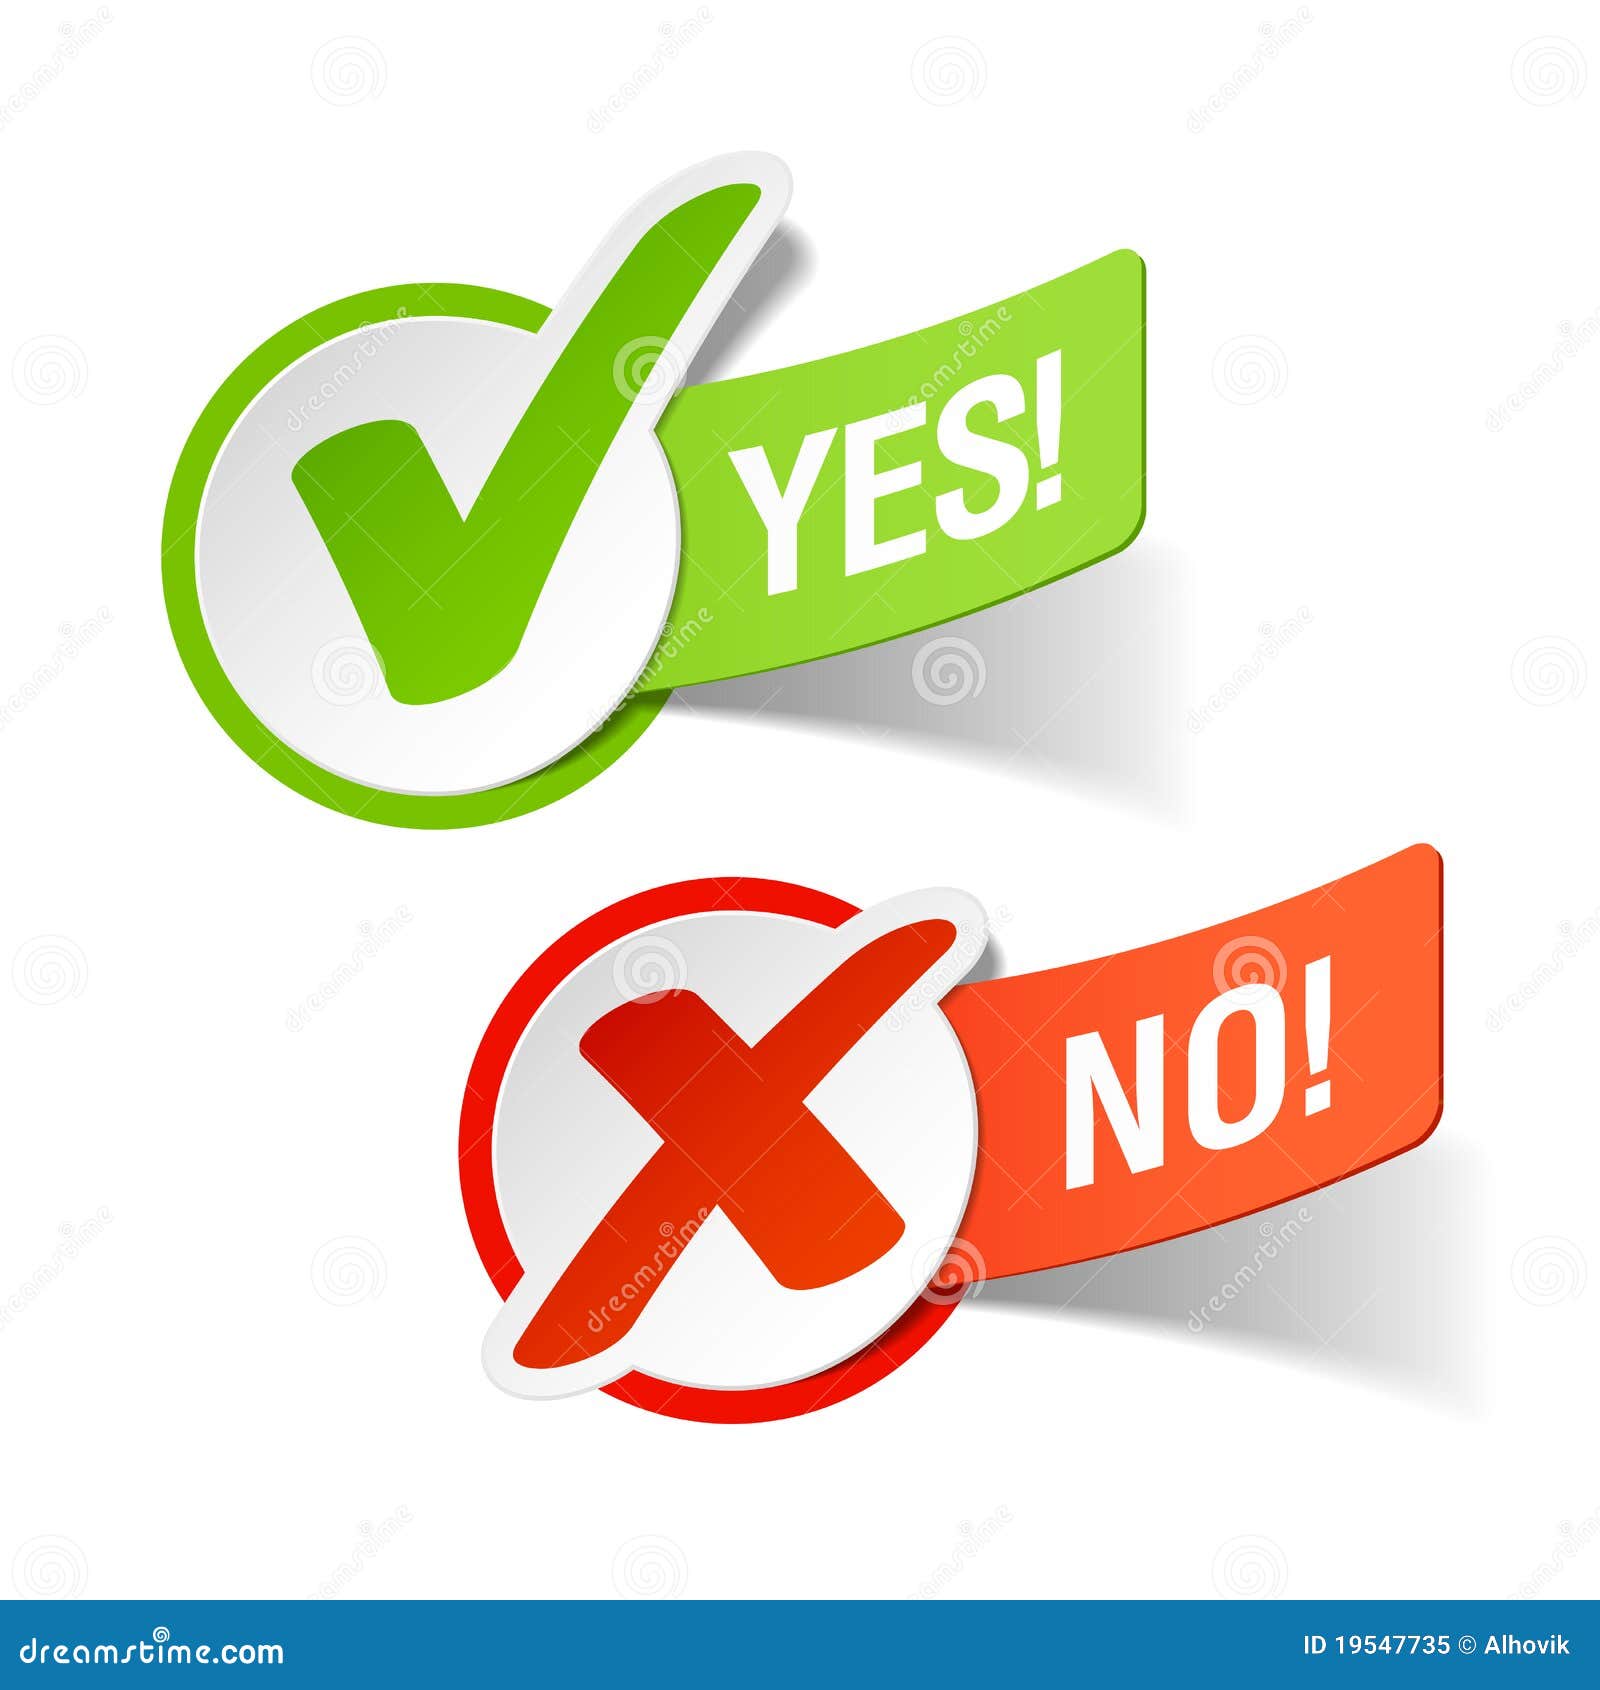 clipart for yes and no - photo #37